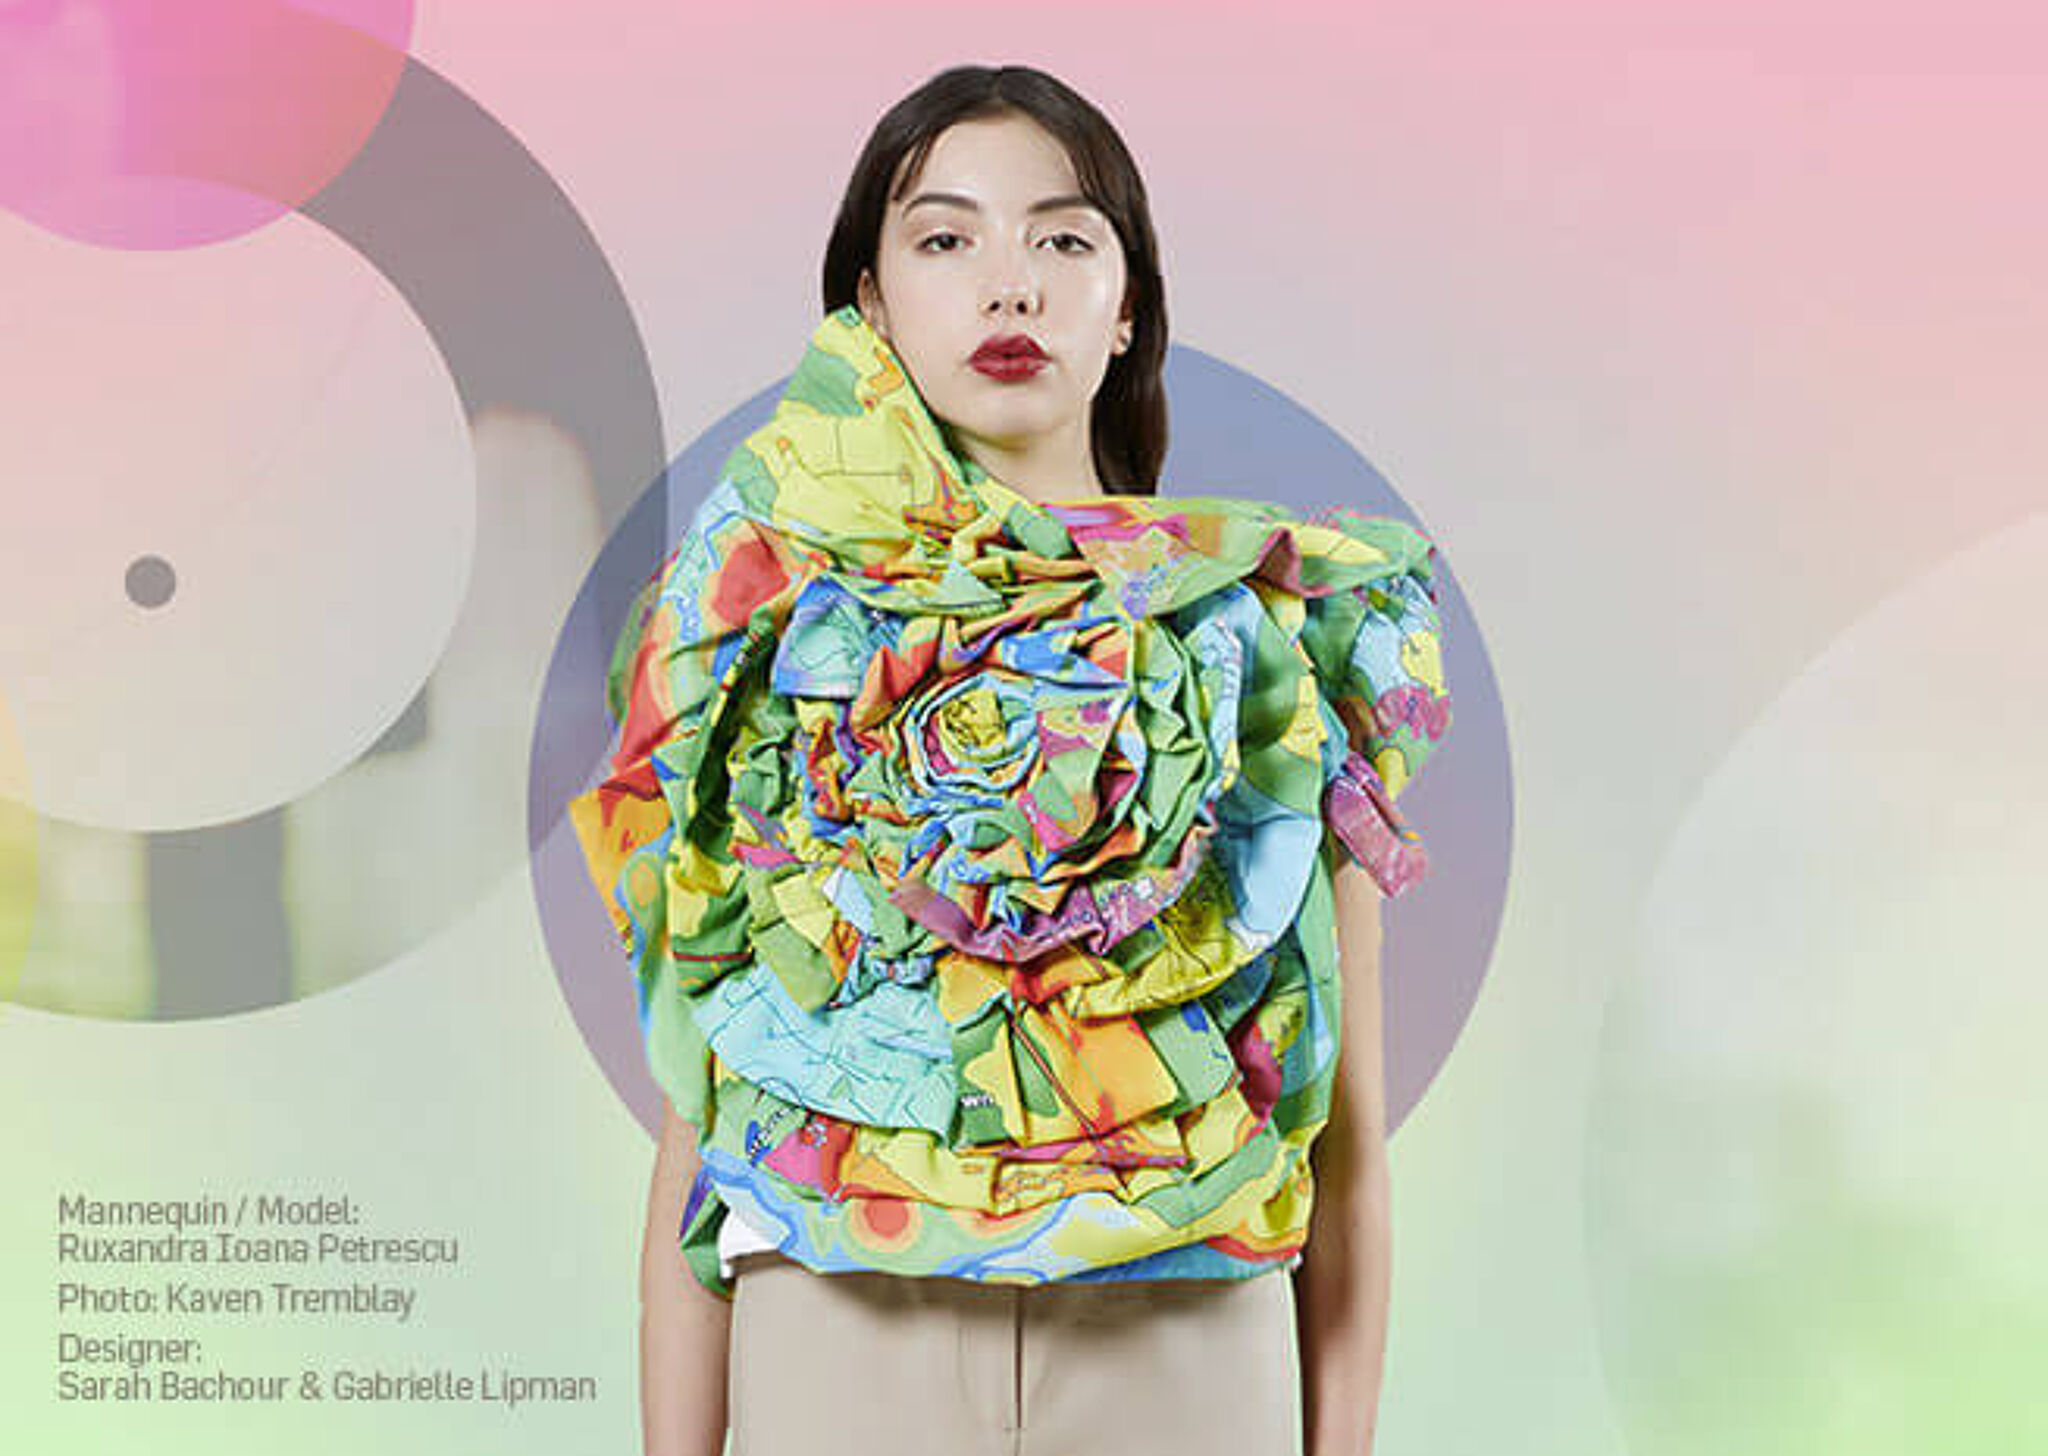 A model with an oversized, colorful map-patterned ruffle scarf, against a soft, abstract background.